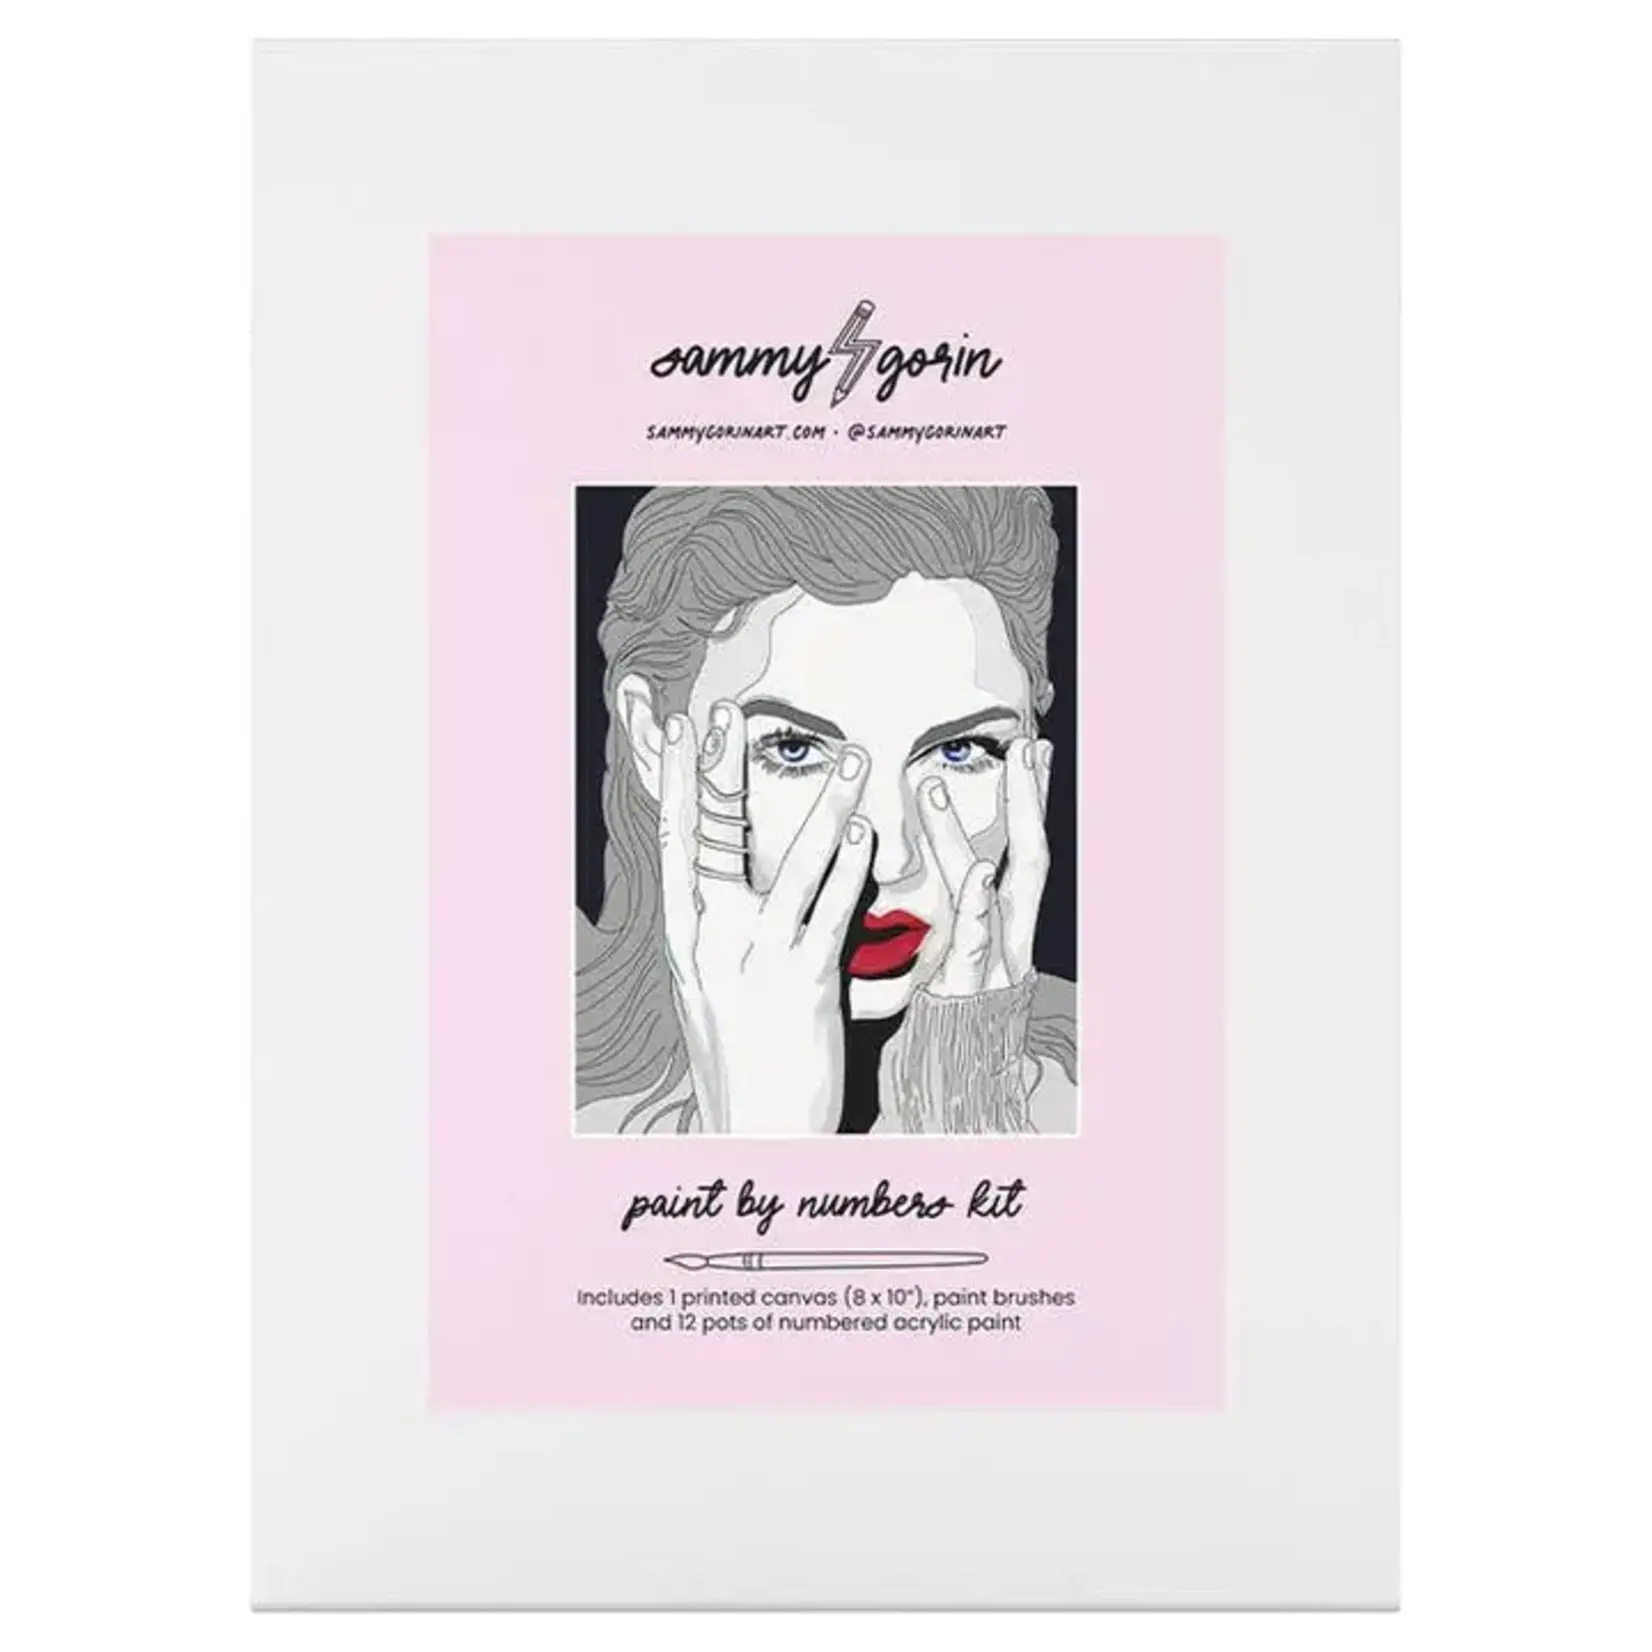 Sammy Gorin Taylor Swift Reputation Paint by Numbers Kit